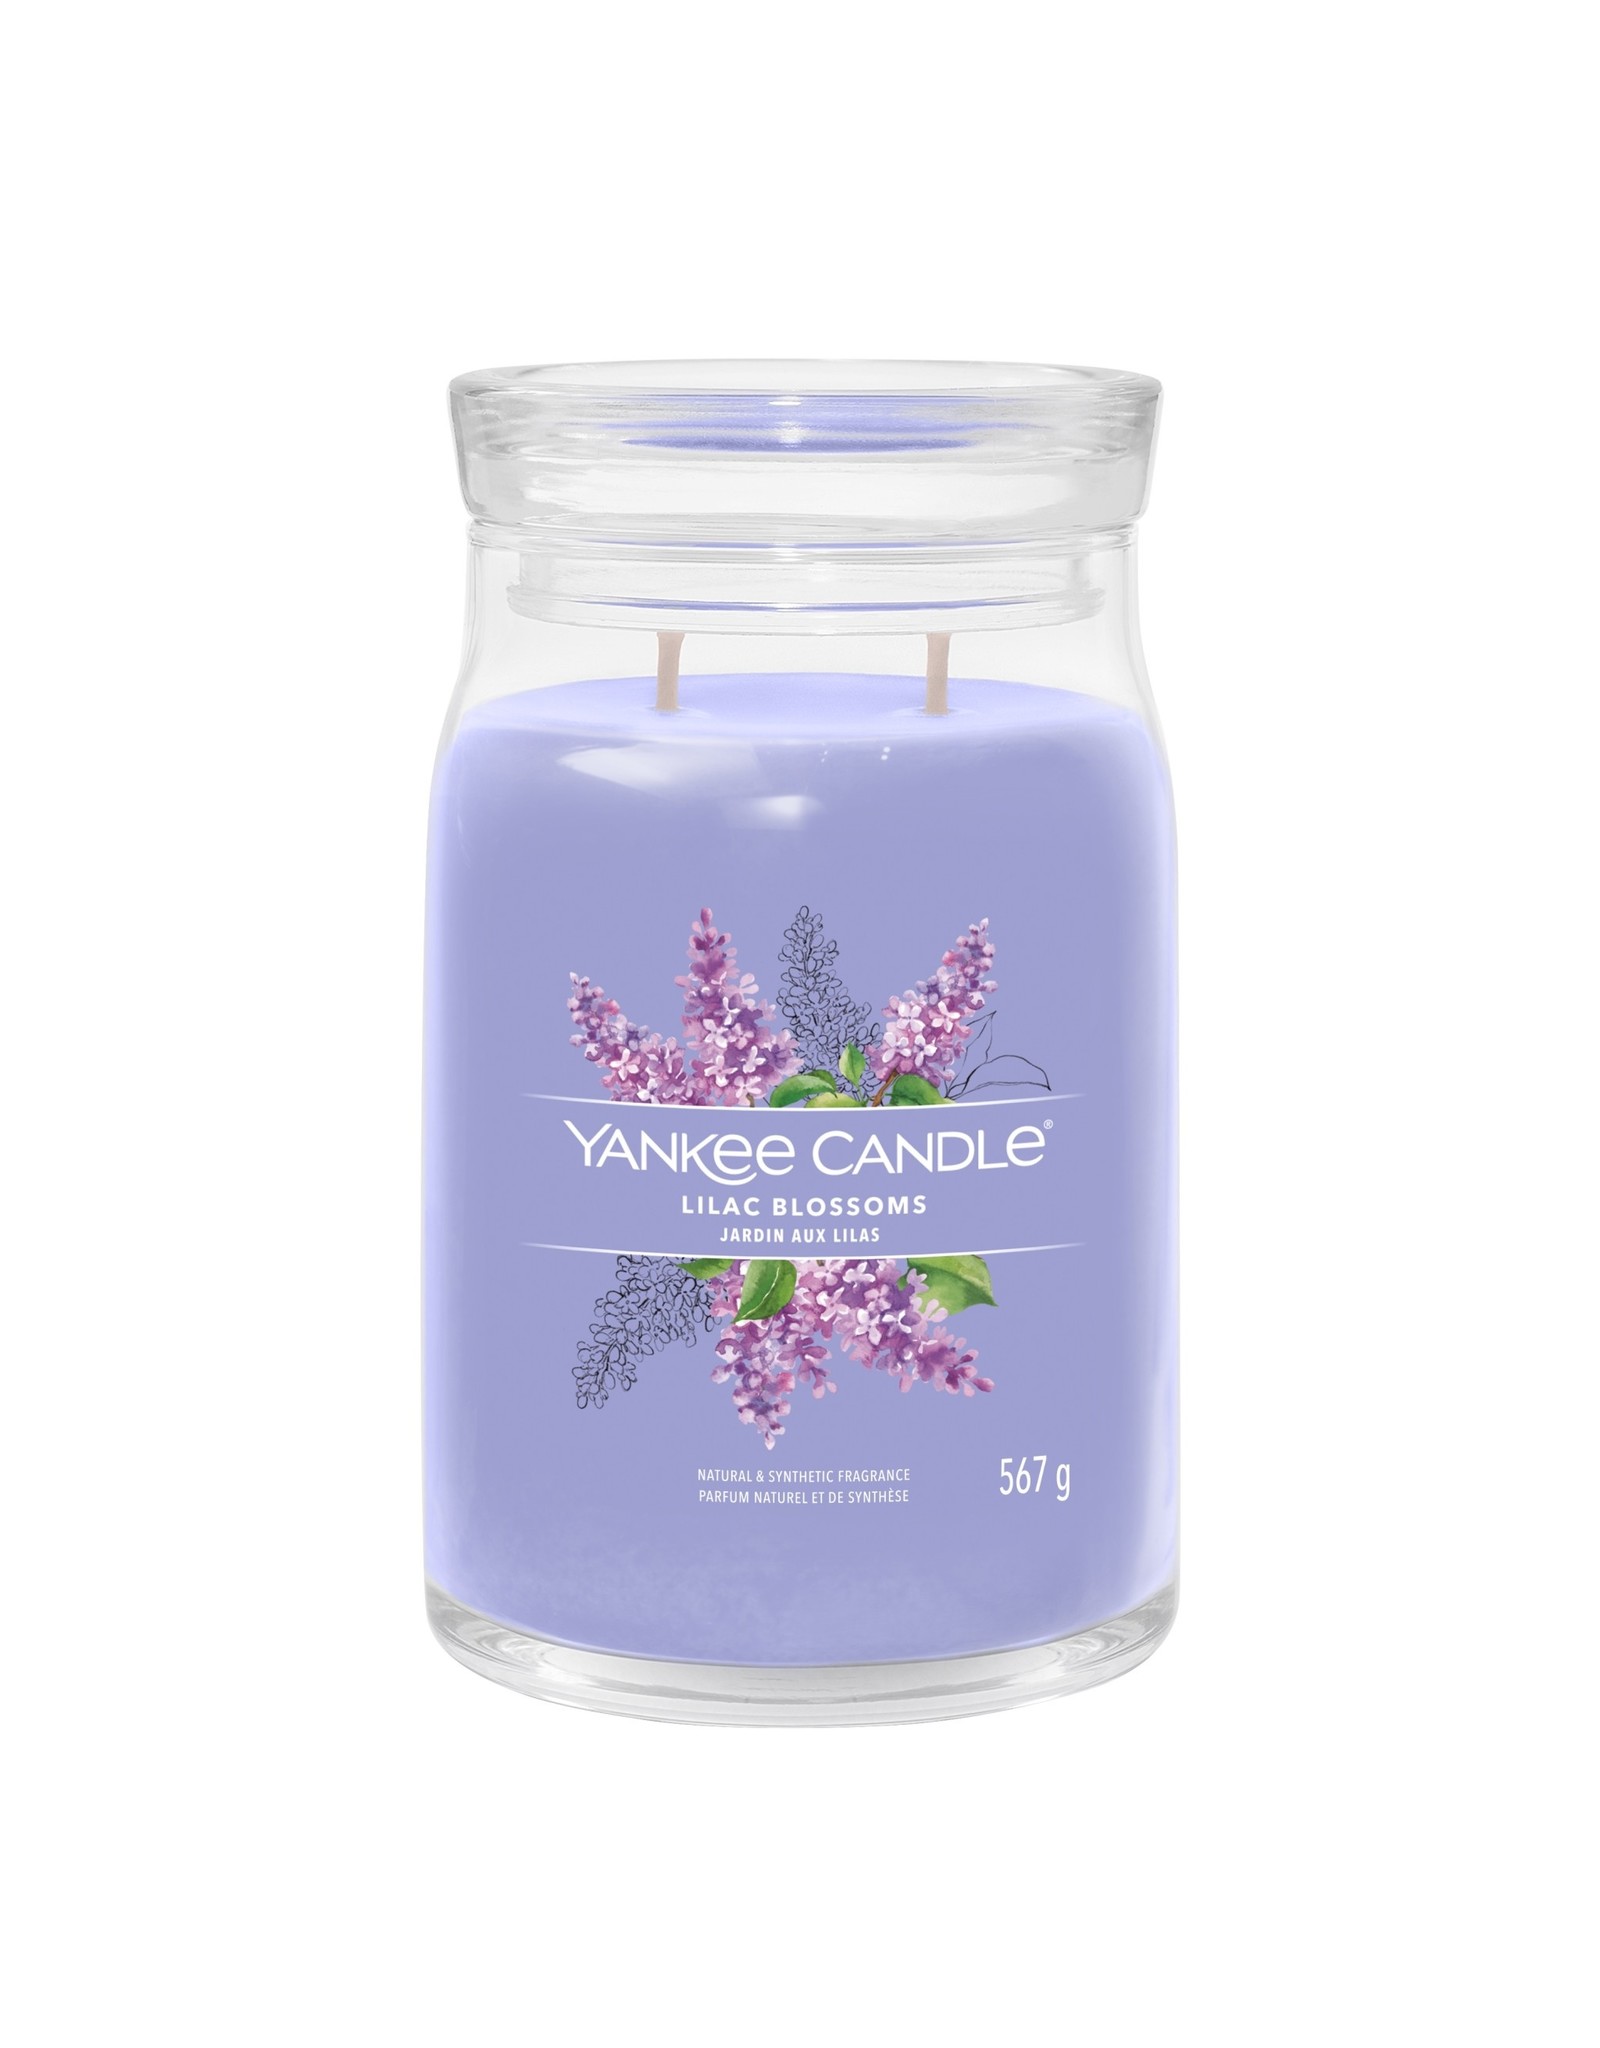 Yankee Candle Lilac Blossoms - Signature Large Jar